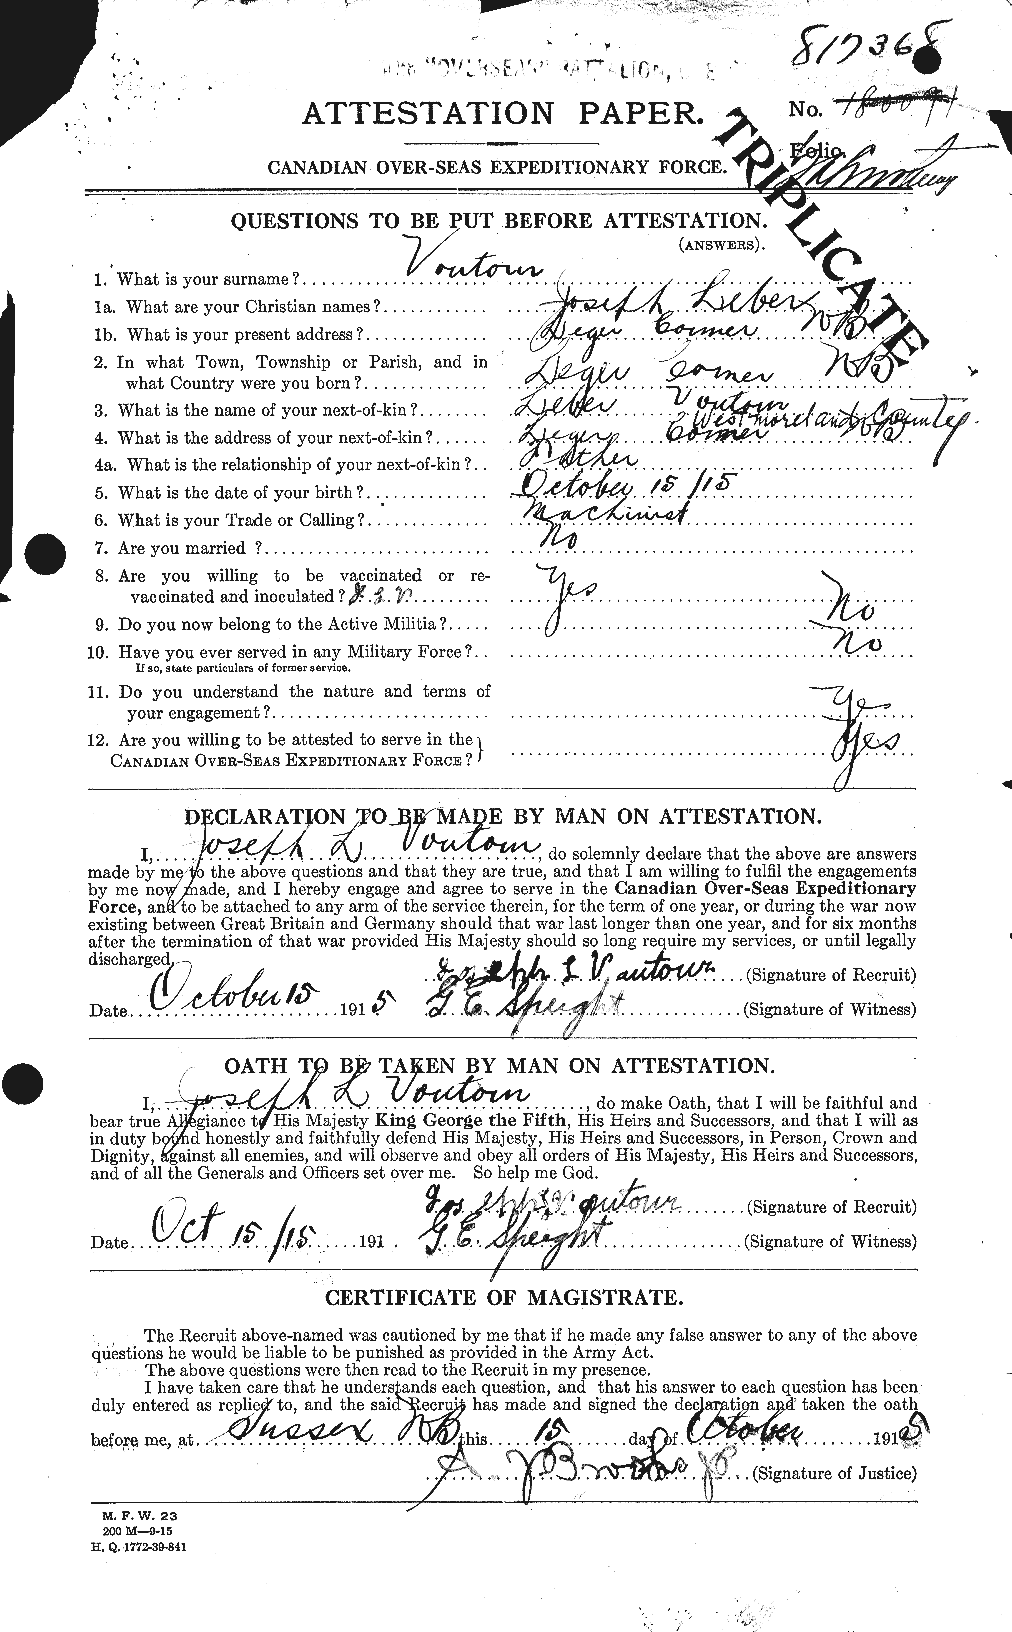 Personnel Records of the First World War - CEF 652450a